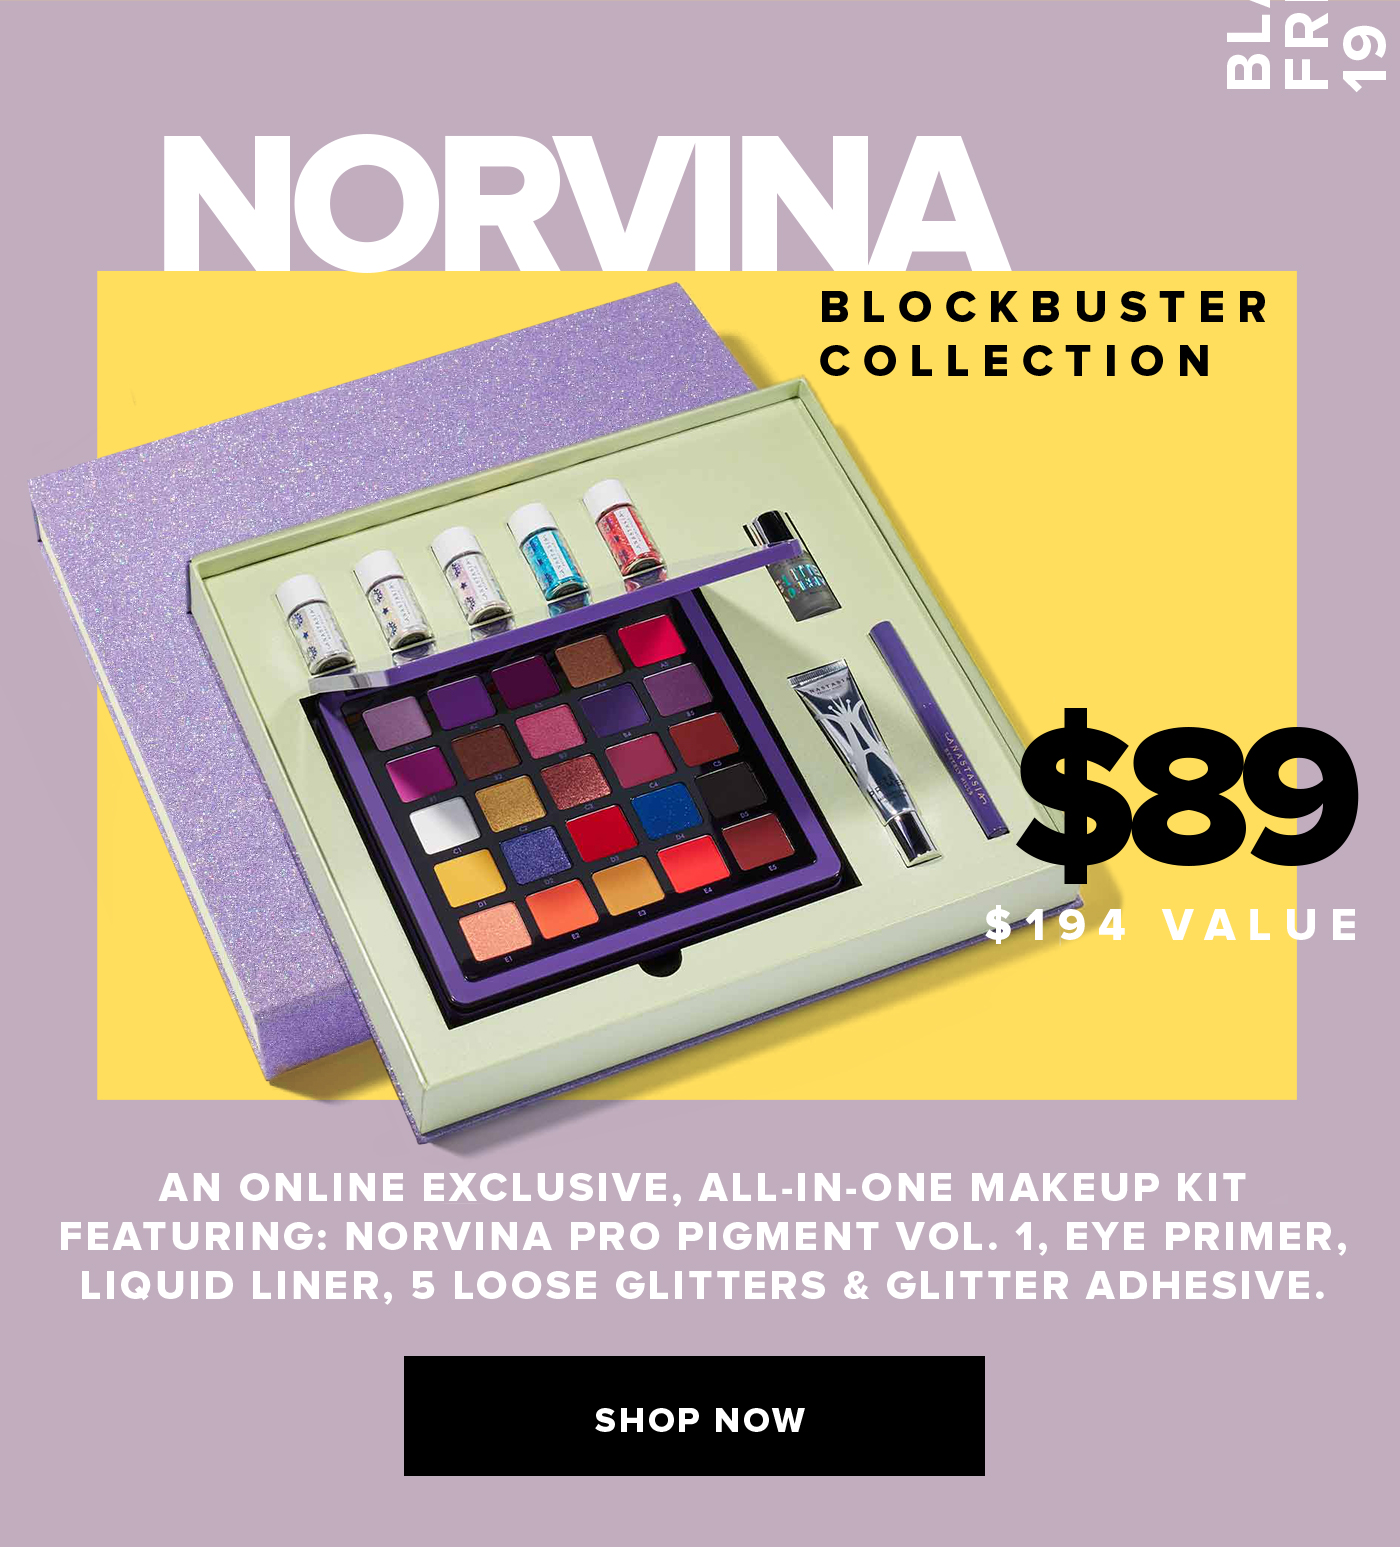 NORVINA BLOCKBUSTER COLLECTION $89 $194 VALUE AN ONLINE EXCLUSIVE, ALL-IN-ONE MAKEUP KIT FEATURING: NORVINA PRO PIGMENT VOL. 1, EYE PRIMER, LIQUID LINER, 5 LOOSE GLITTERS & GLITTER ADHESIVE. SHOP NOW